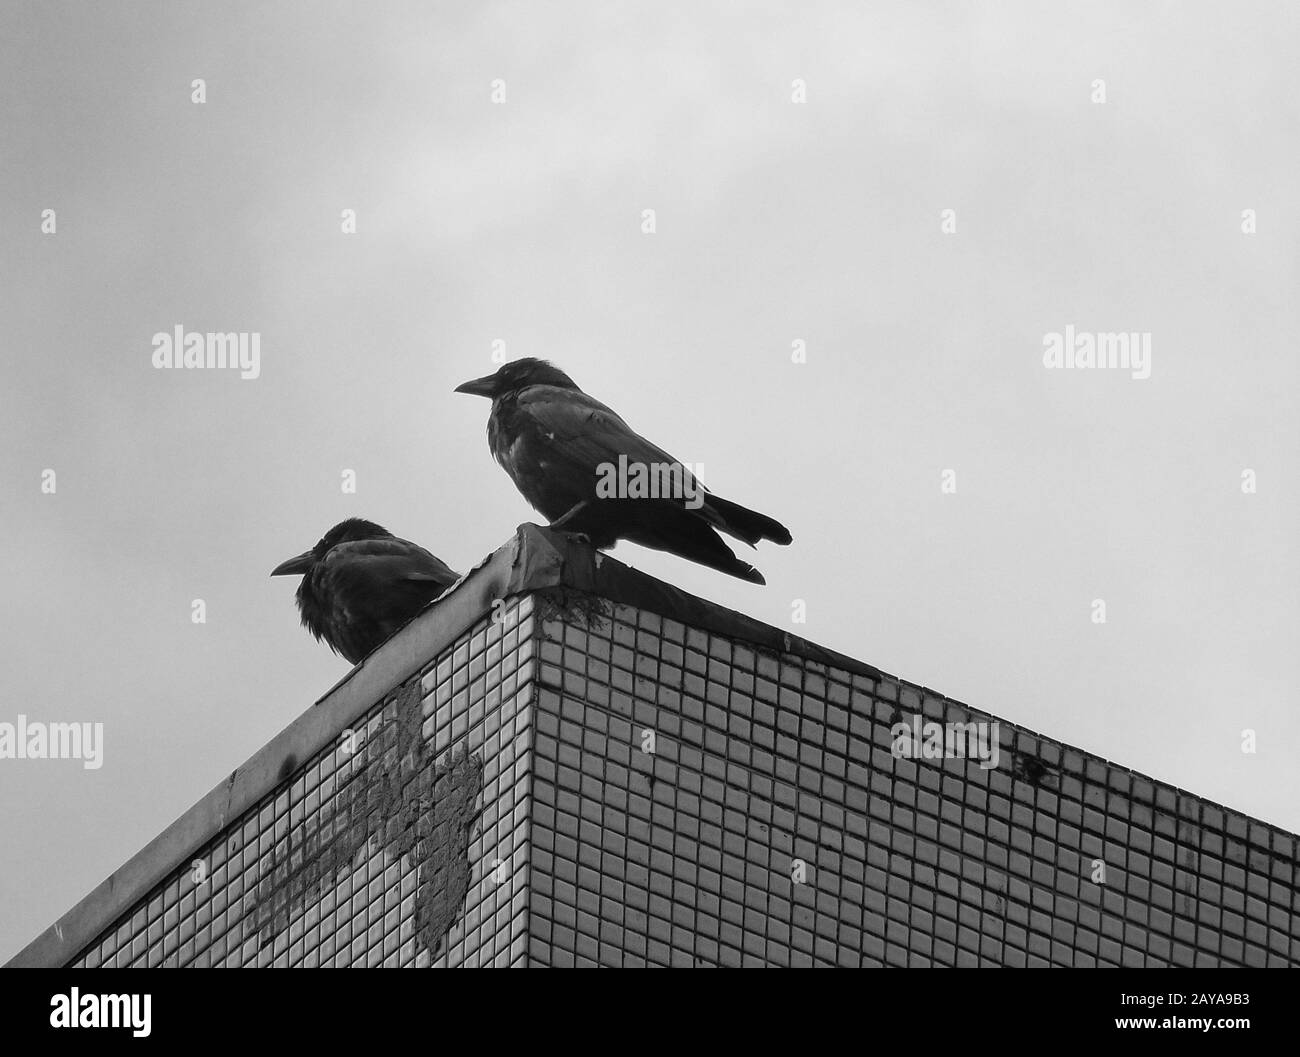 two carrion crows perched on top of an urban building Stock Photo